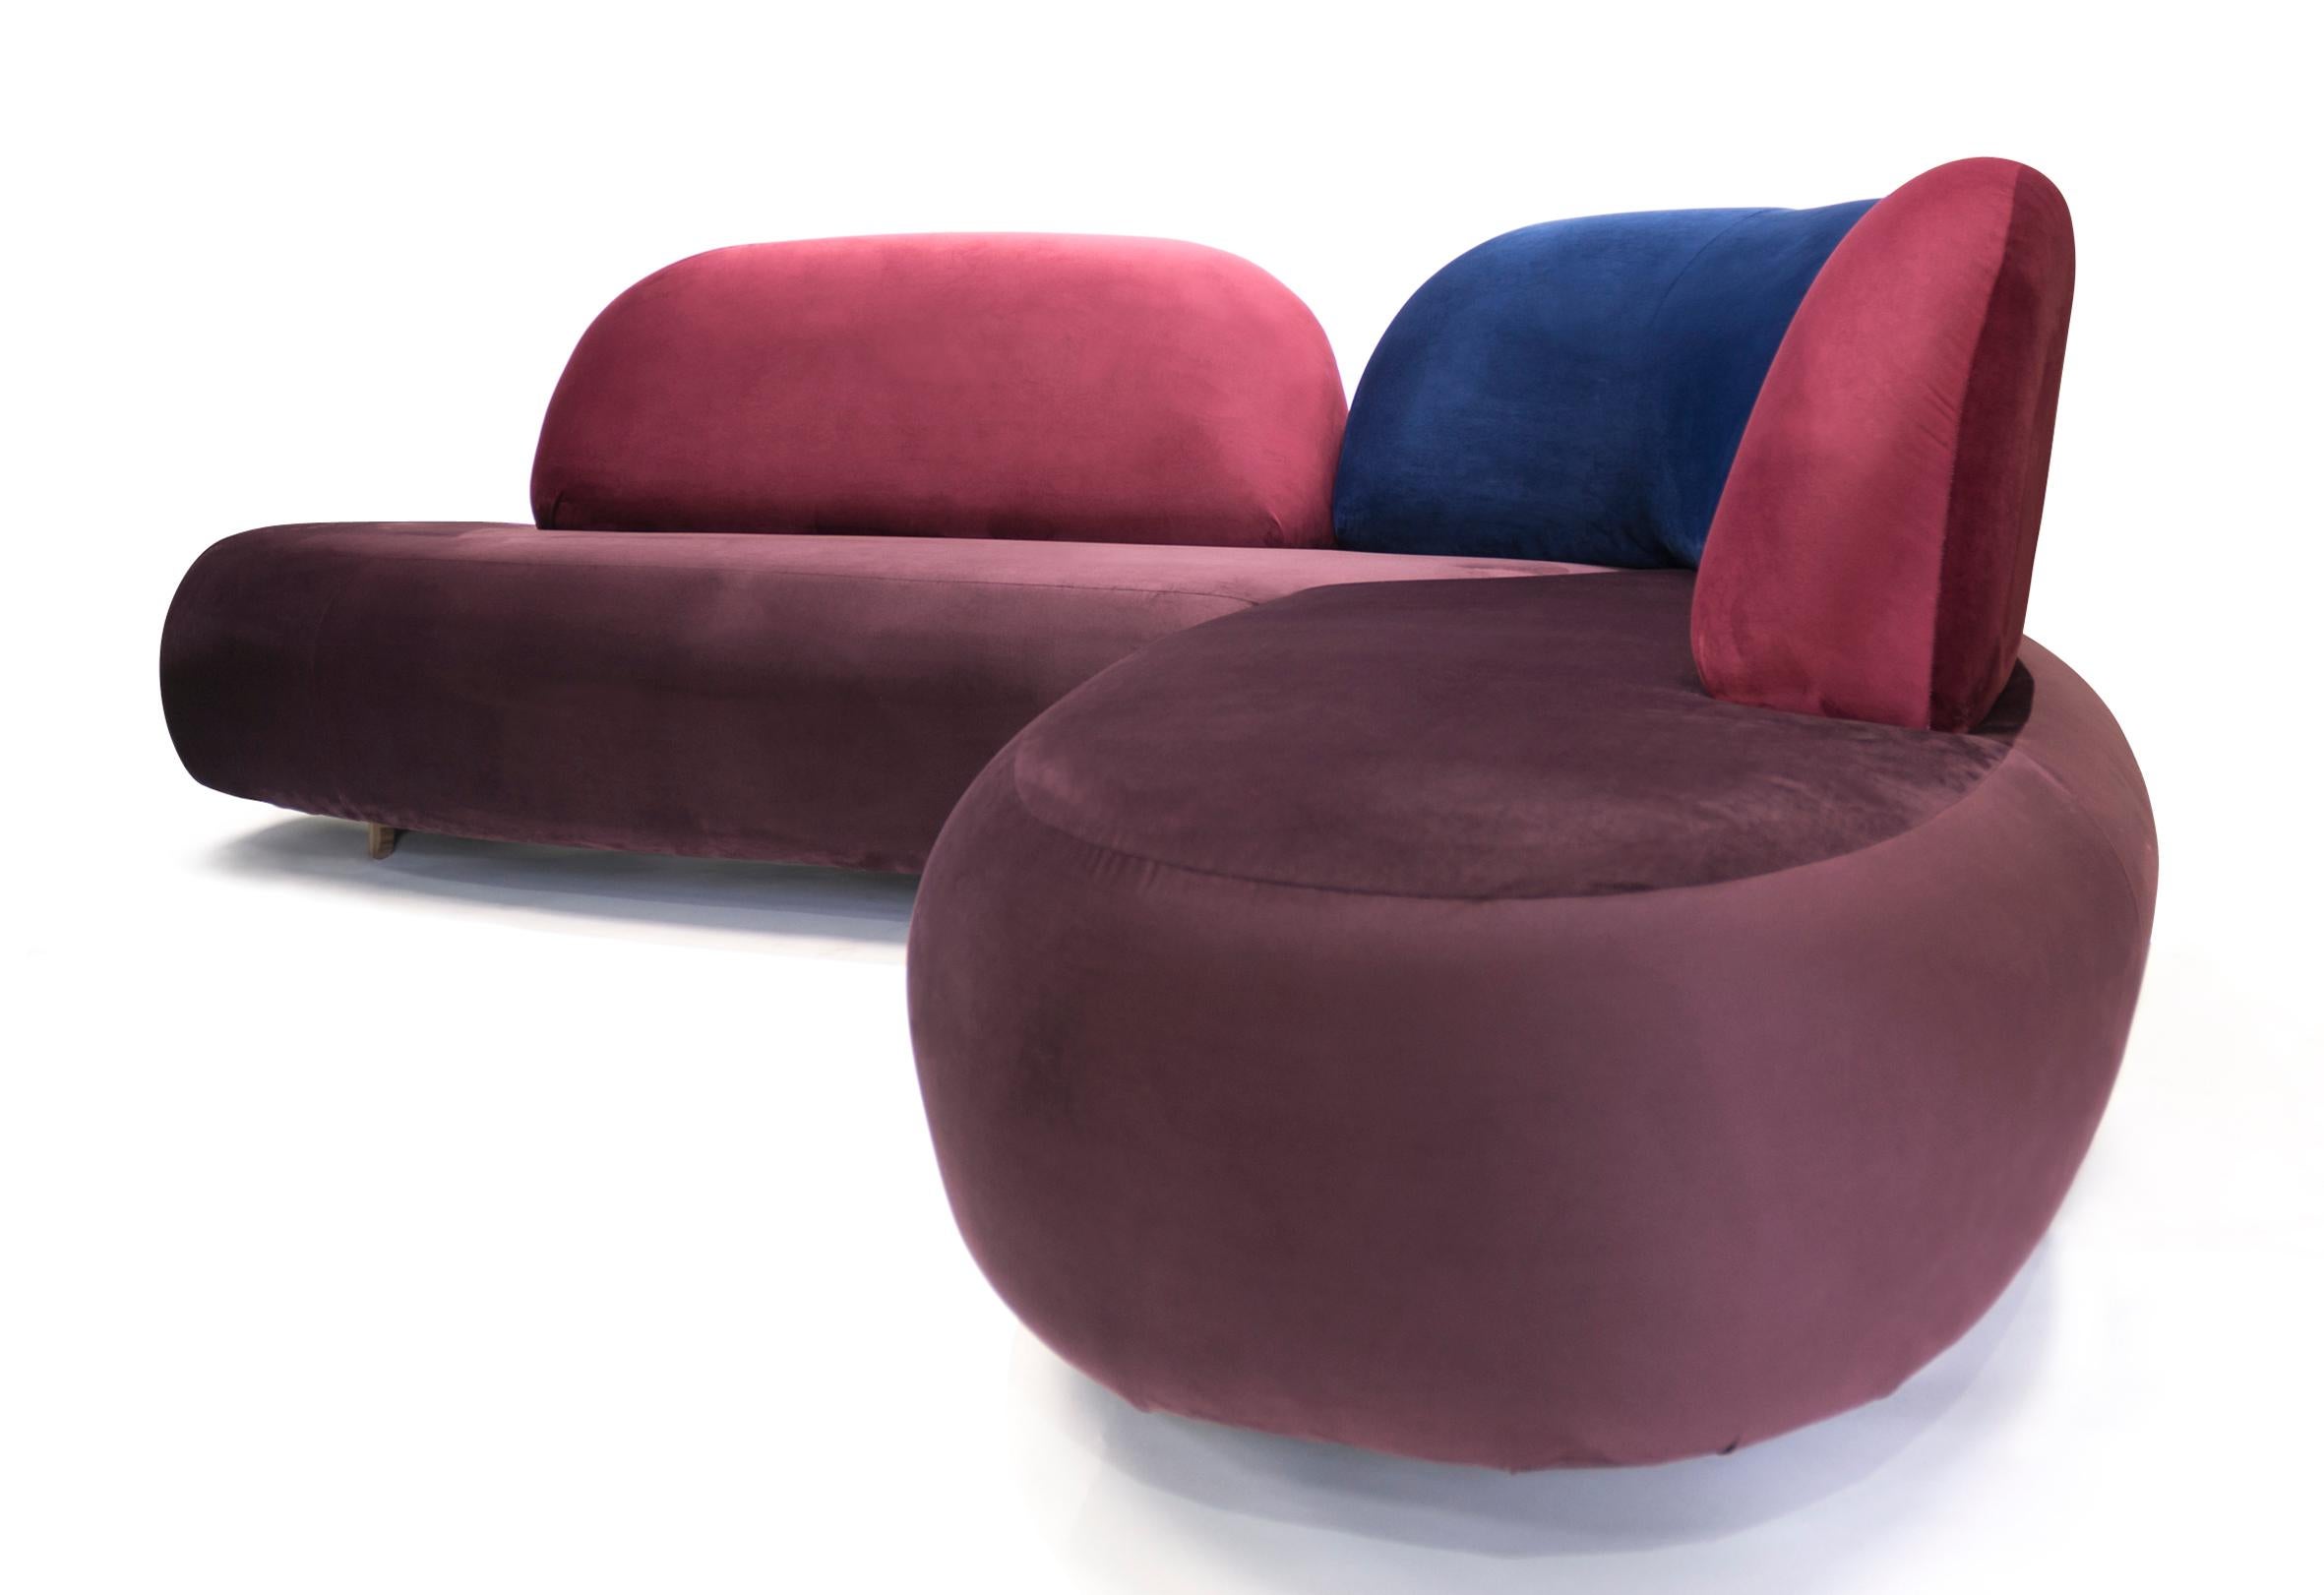 With vibrant colors and welcoming curves, the sophisticated boom sofa materializes as a dynamic sculpture. The velvet fabric gives a feeling of seduction and elegance. Its individual backrests form a unique composition, with the center backrest